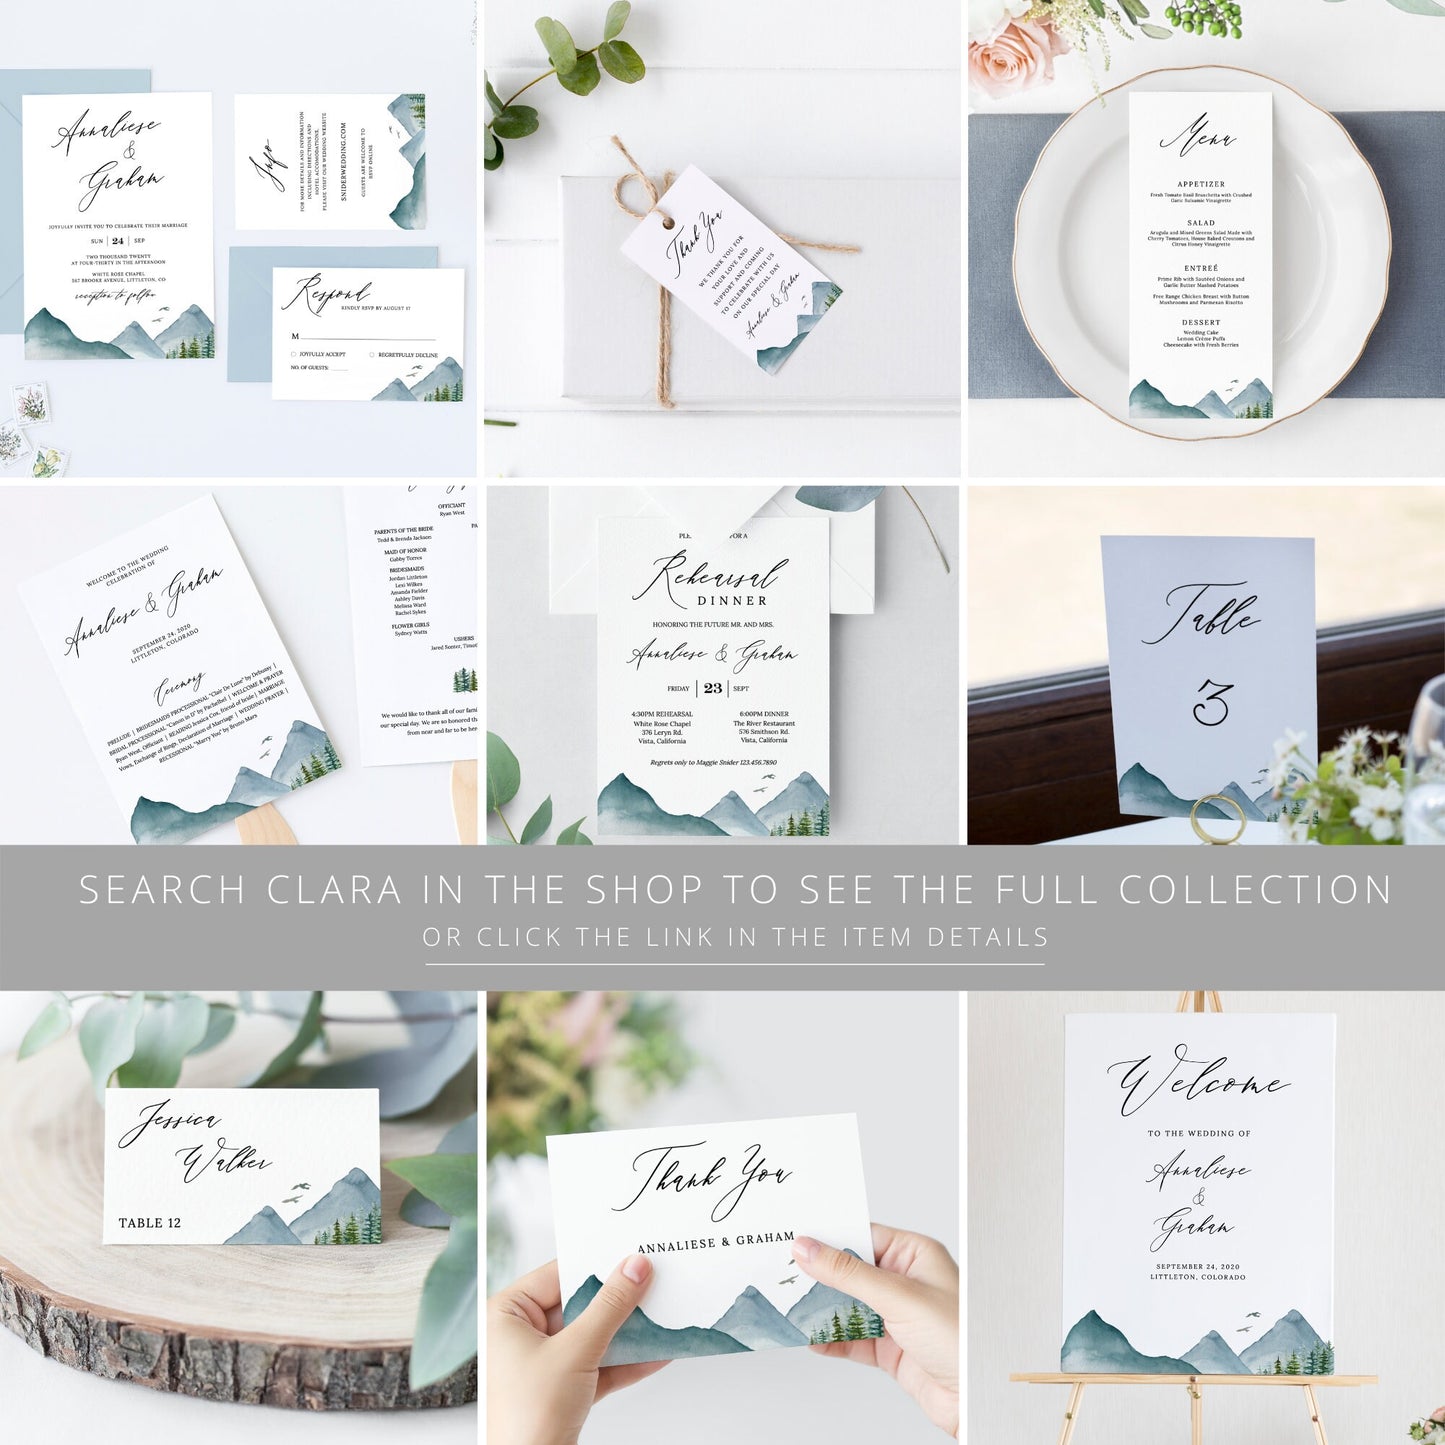 Editable Custom Wedding Sign Mountain Wedding Sign Kit Create Unlimited Signs 8x10 and 10x8 Template